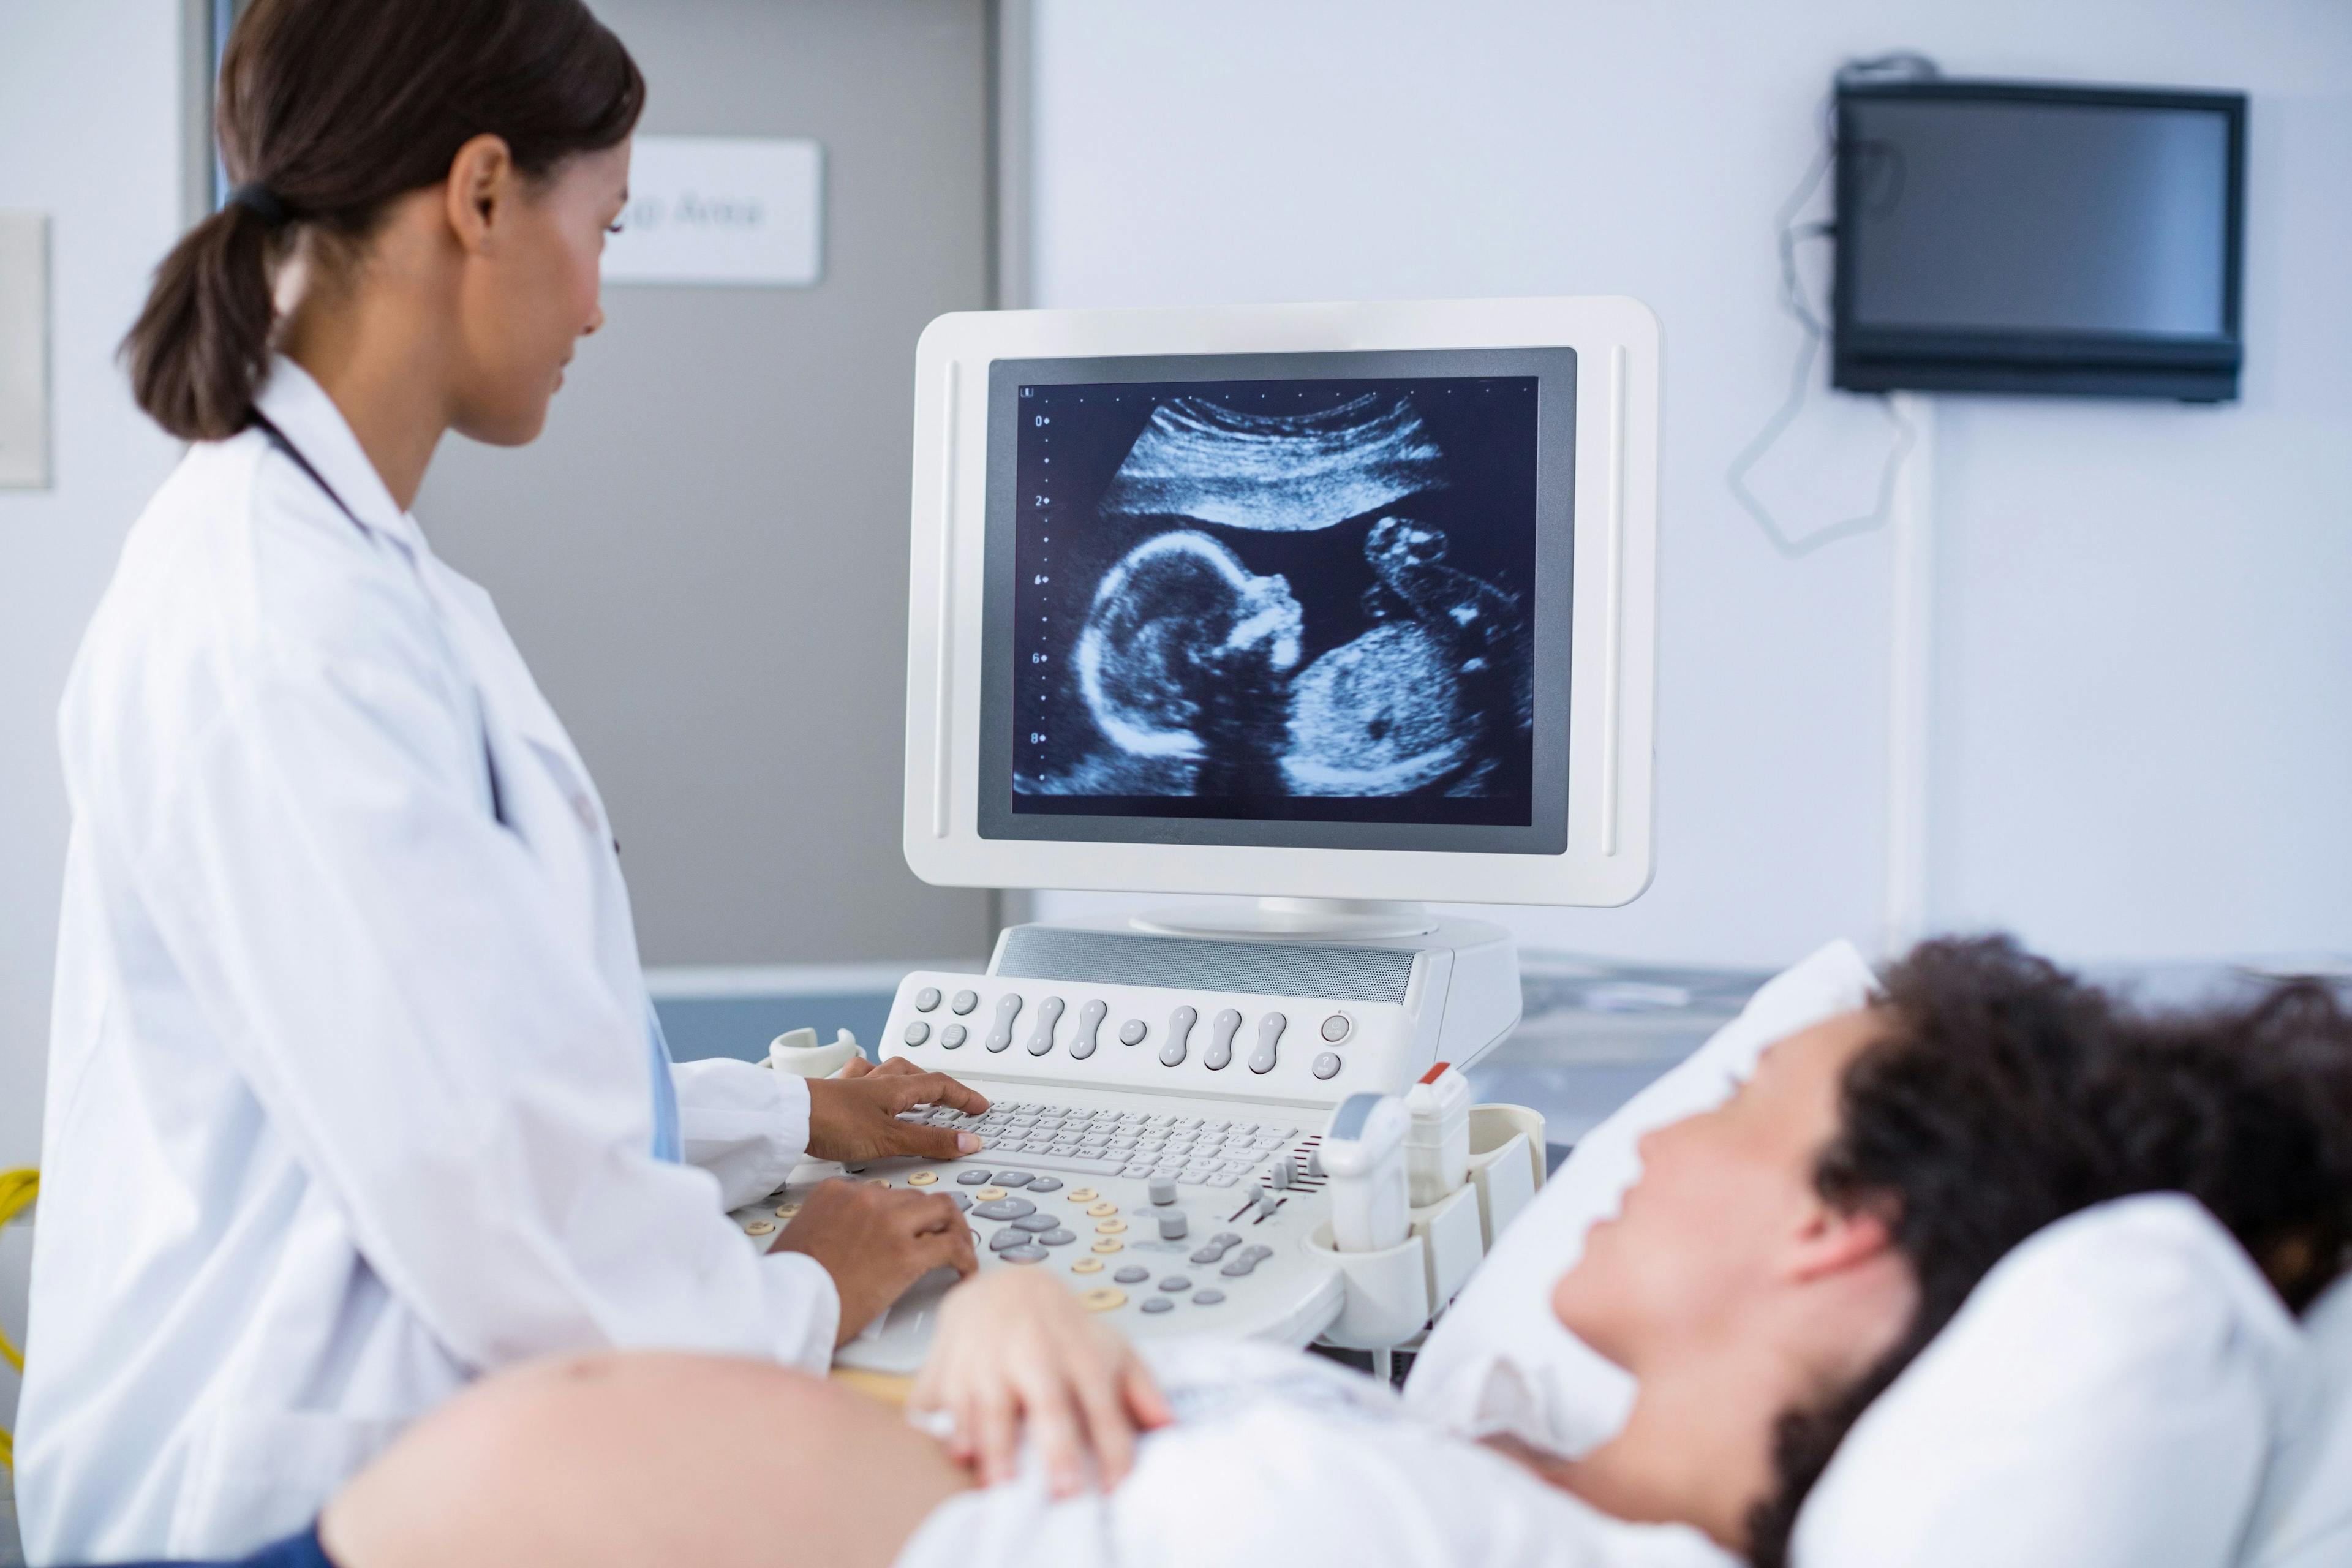 Women with interstitial lung disease can have safe pregnancies